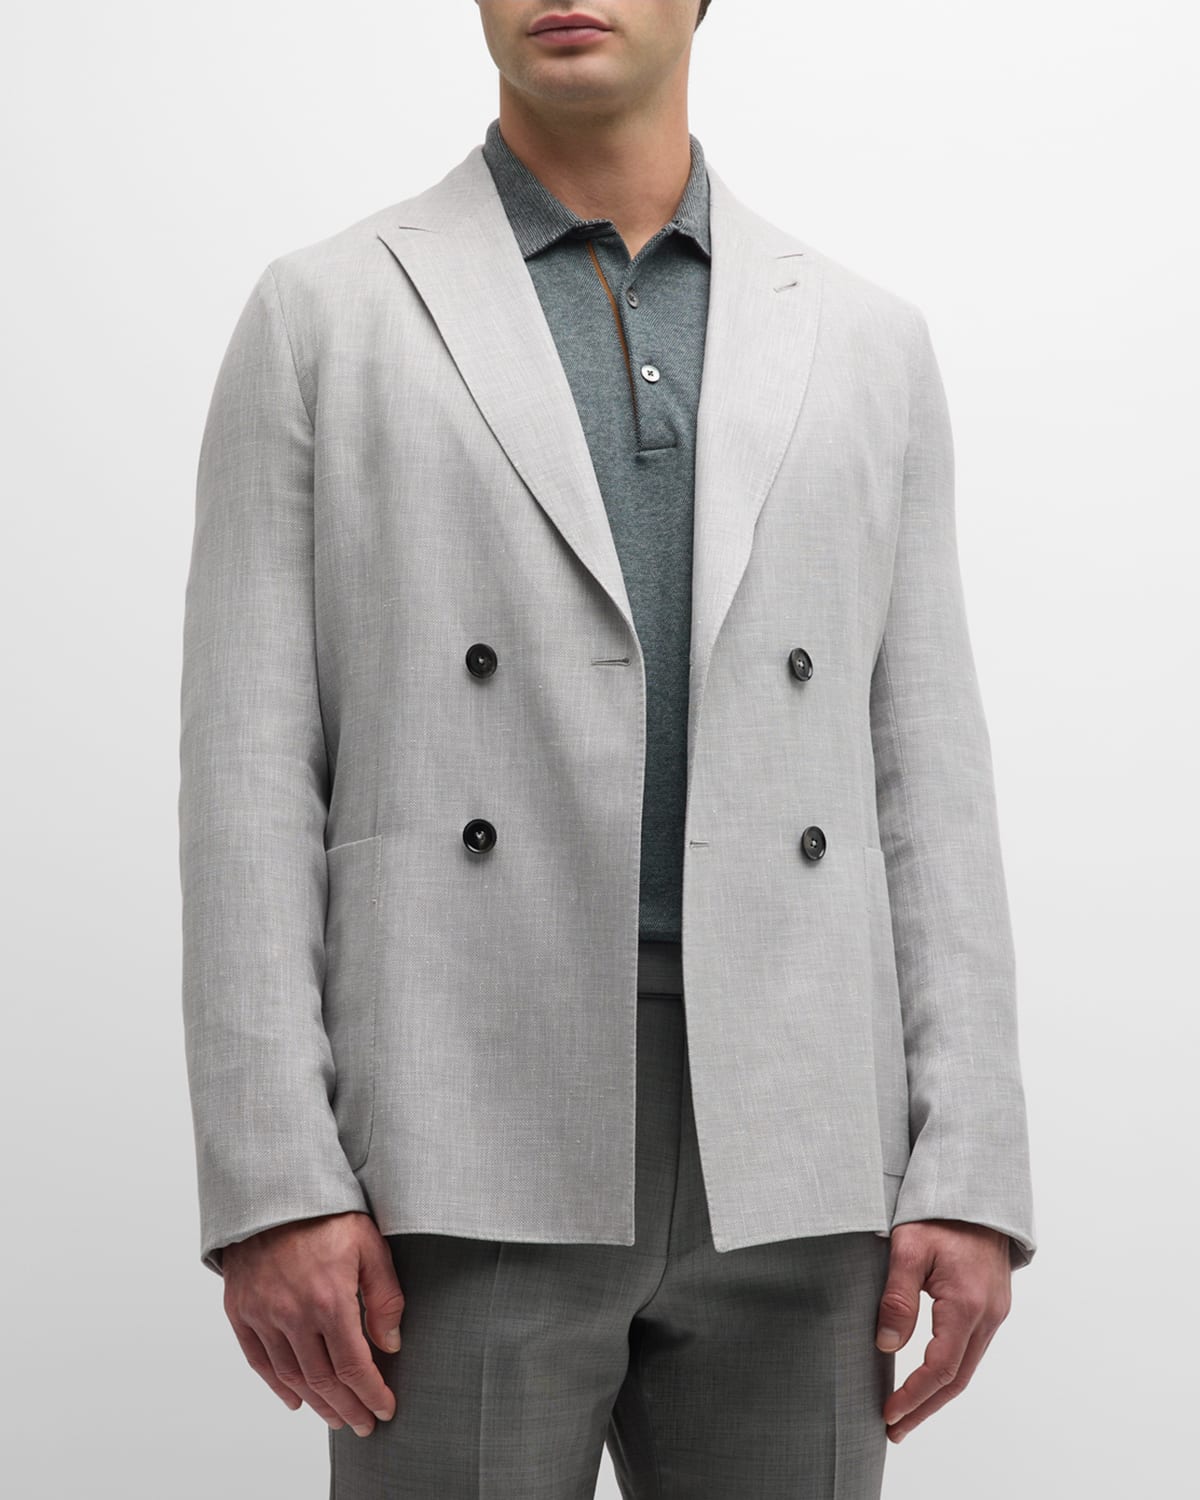 Zegna Men's Crossover Double-breasted Blazer In Light Grey